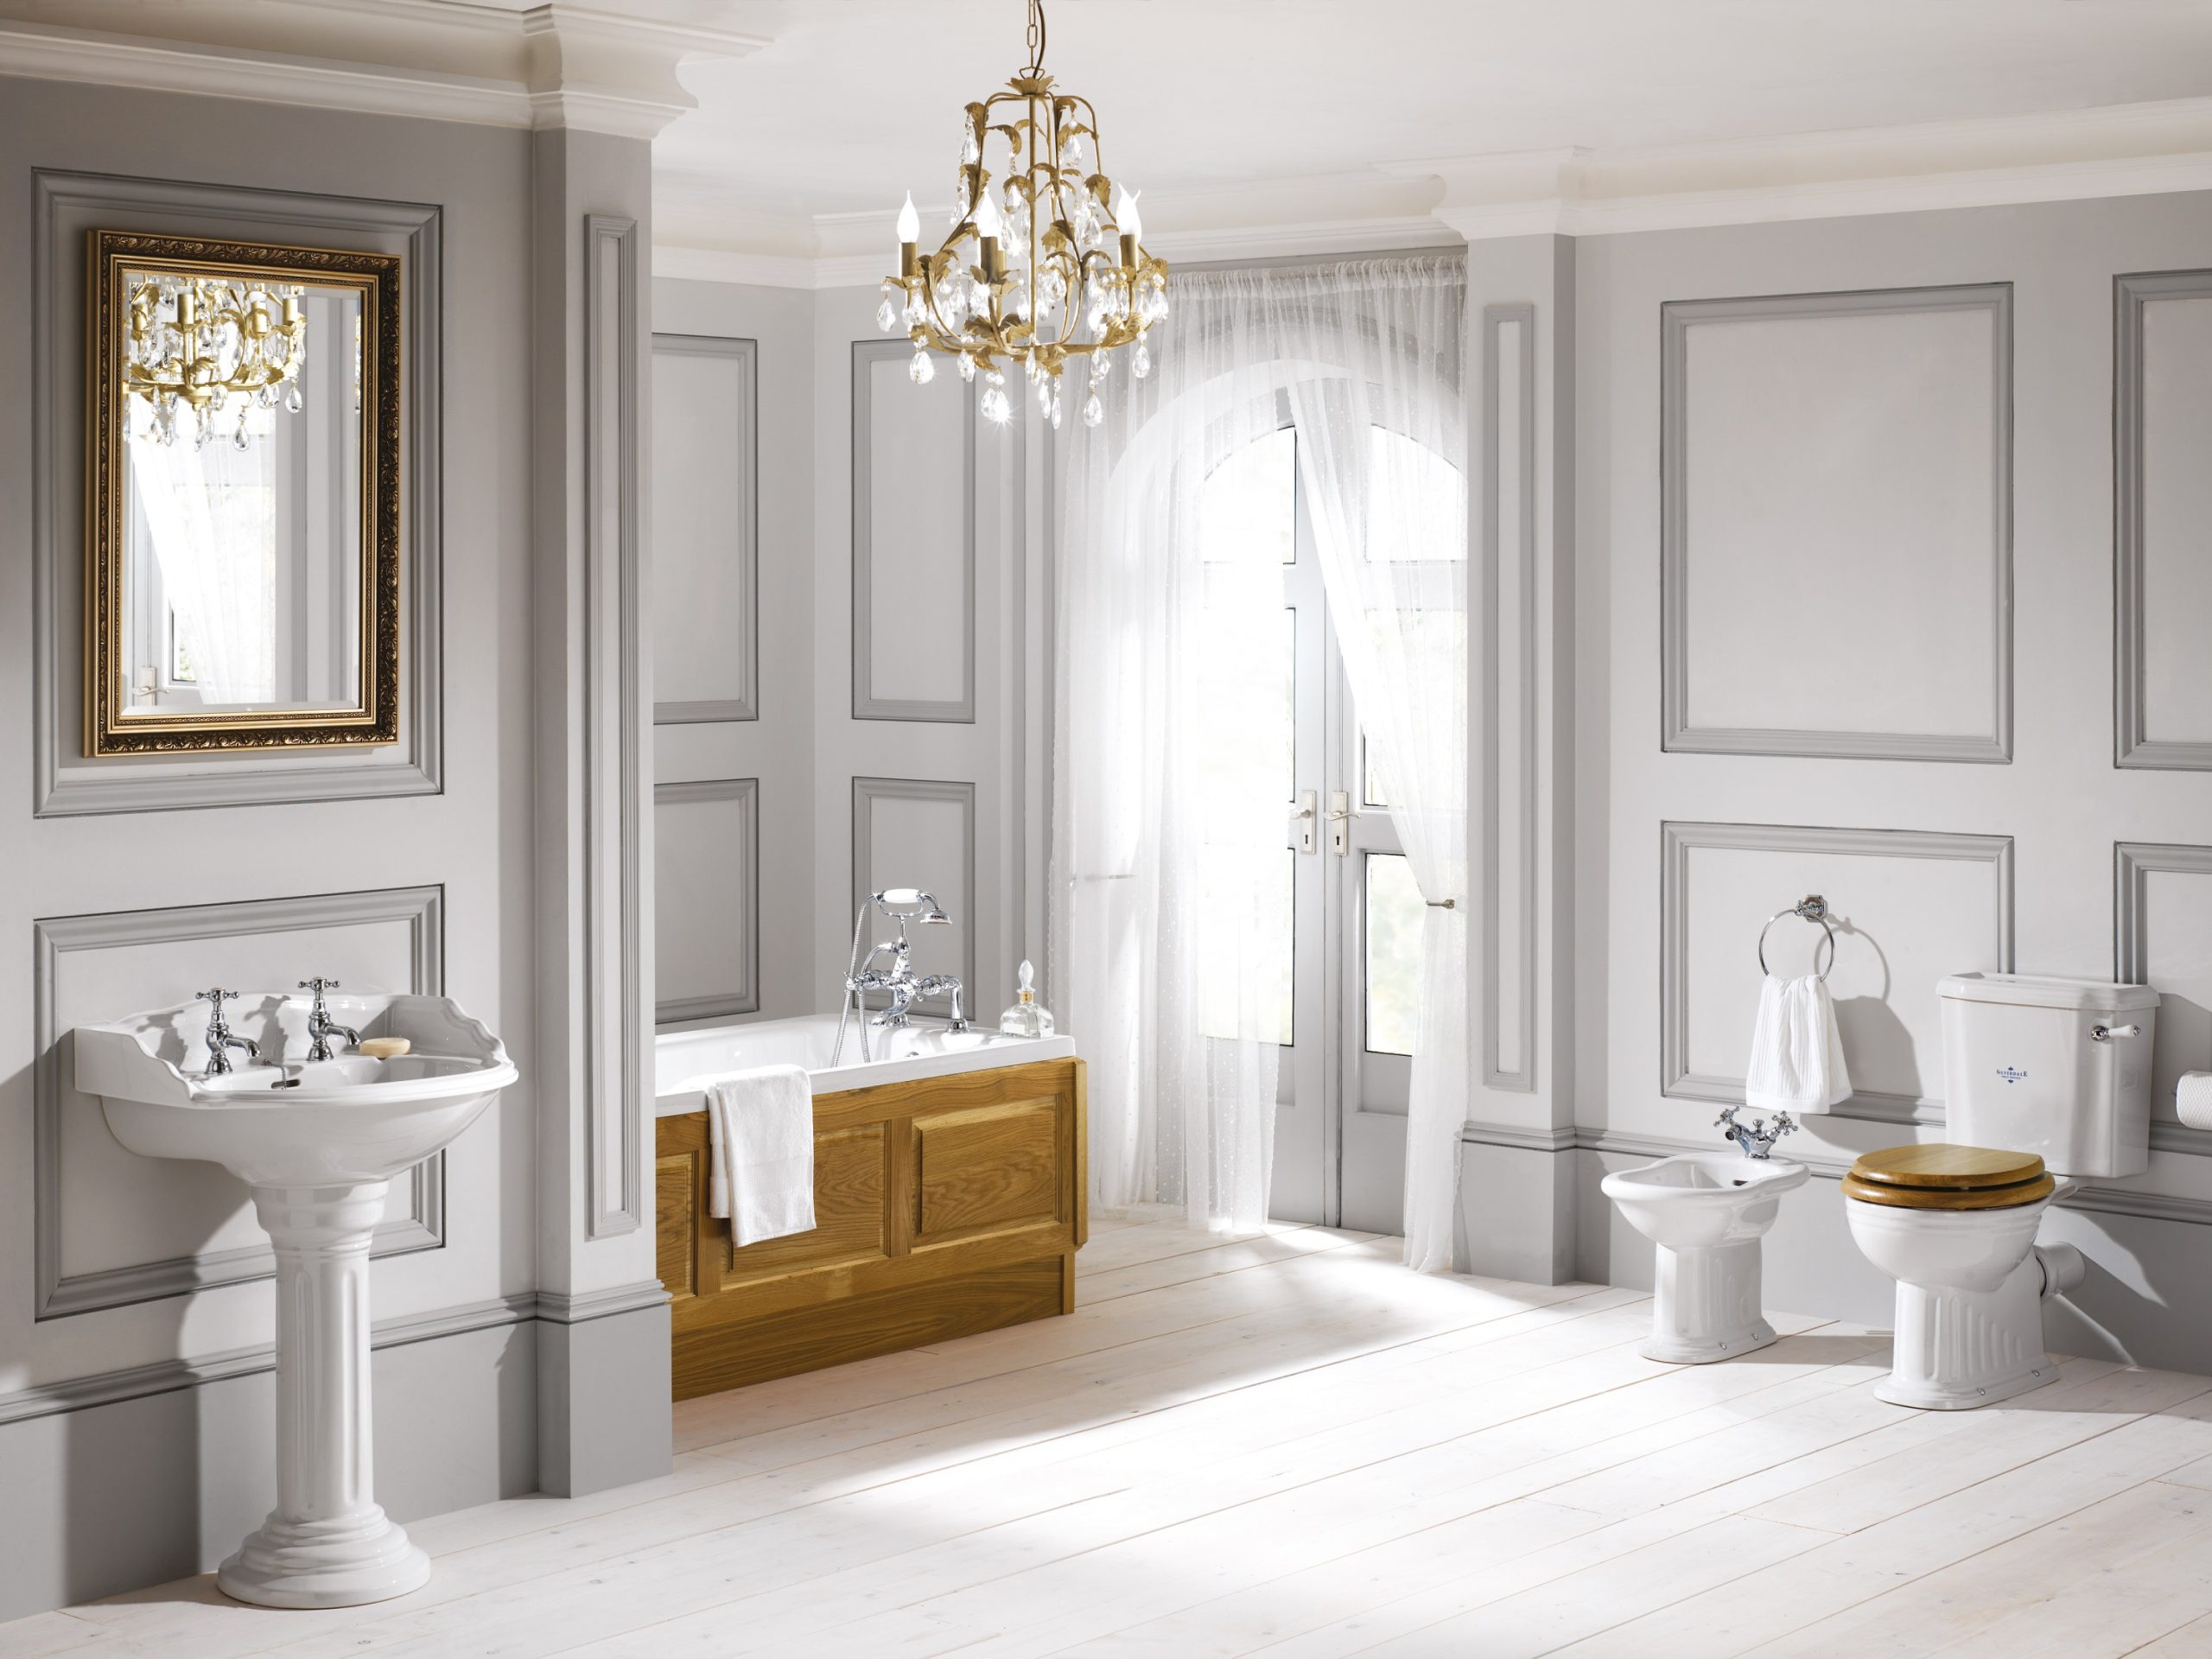 Introducing the Belgravia from Silverdale Bathrooms